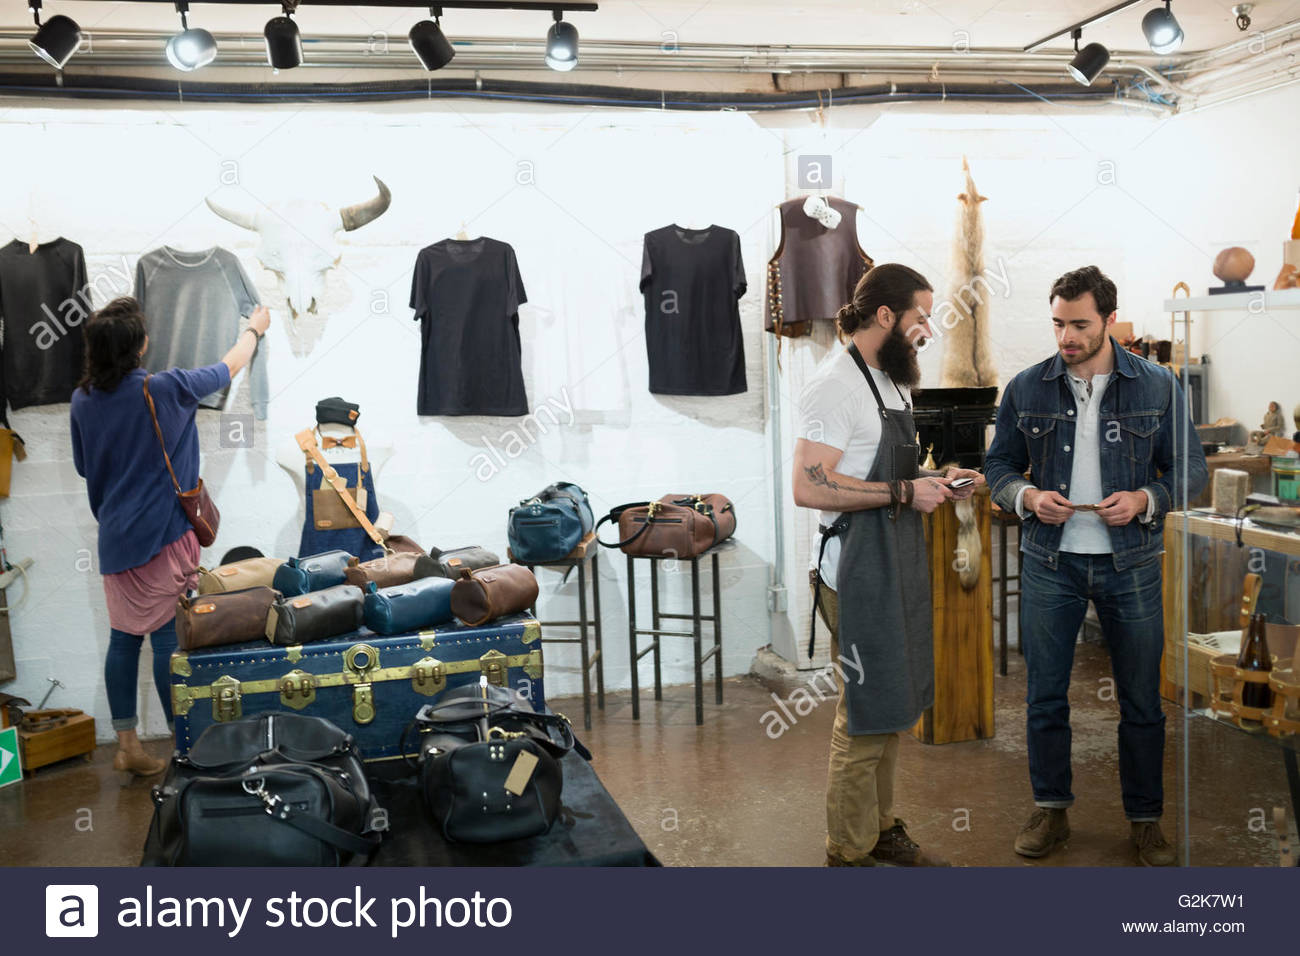 Leather shop owner assisting customer Stock Photo